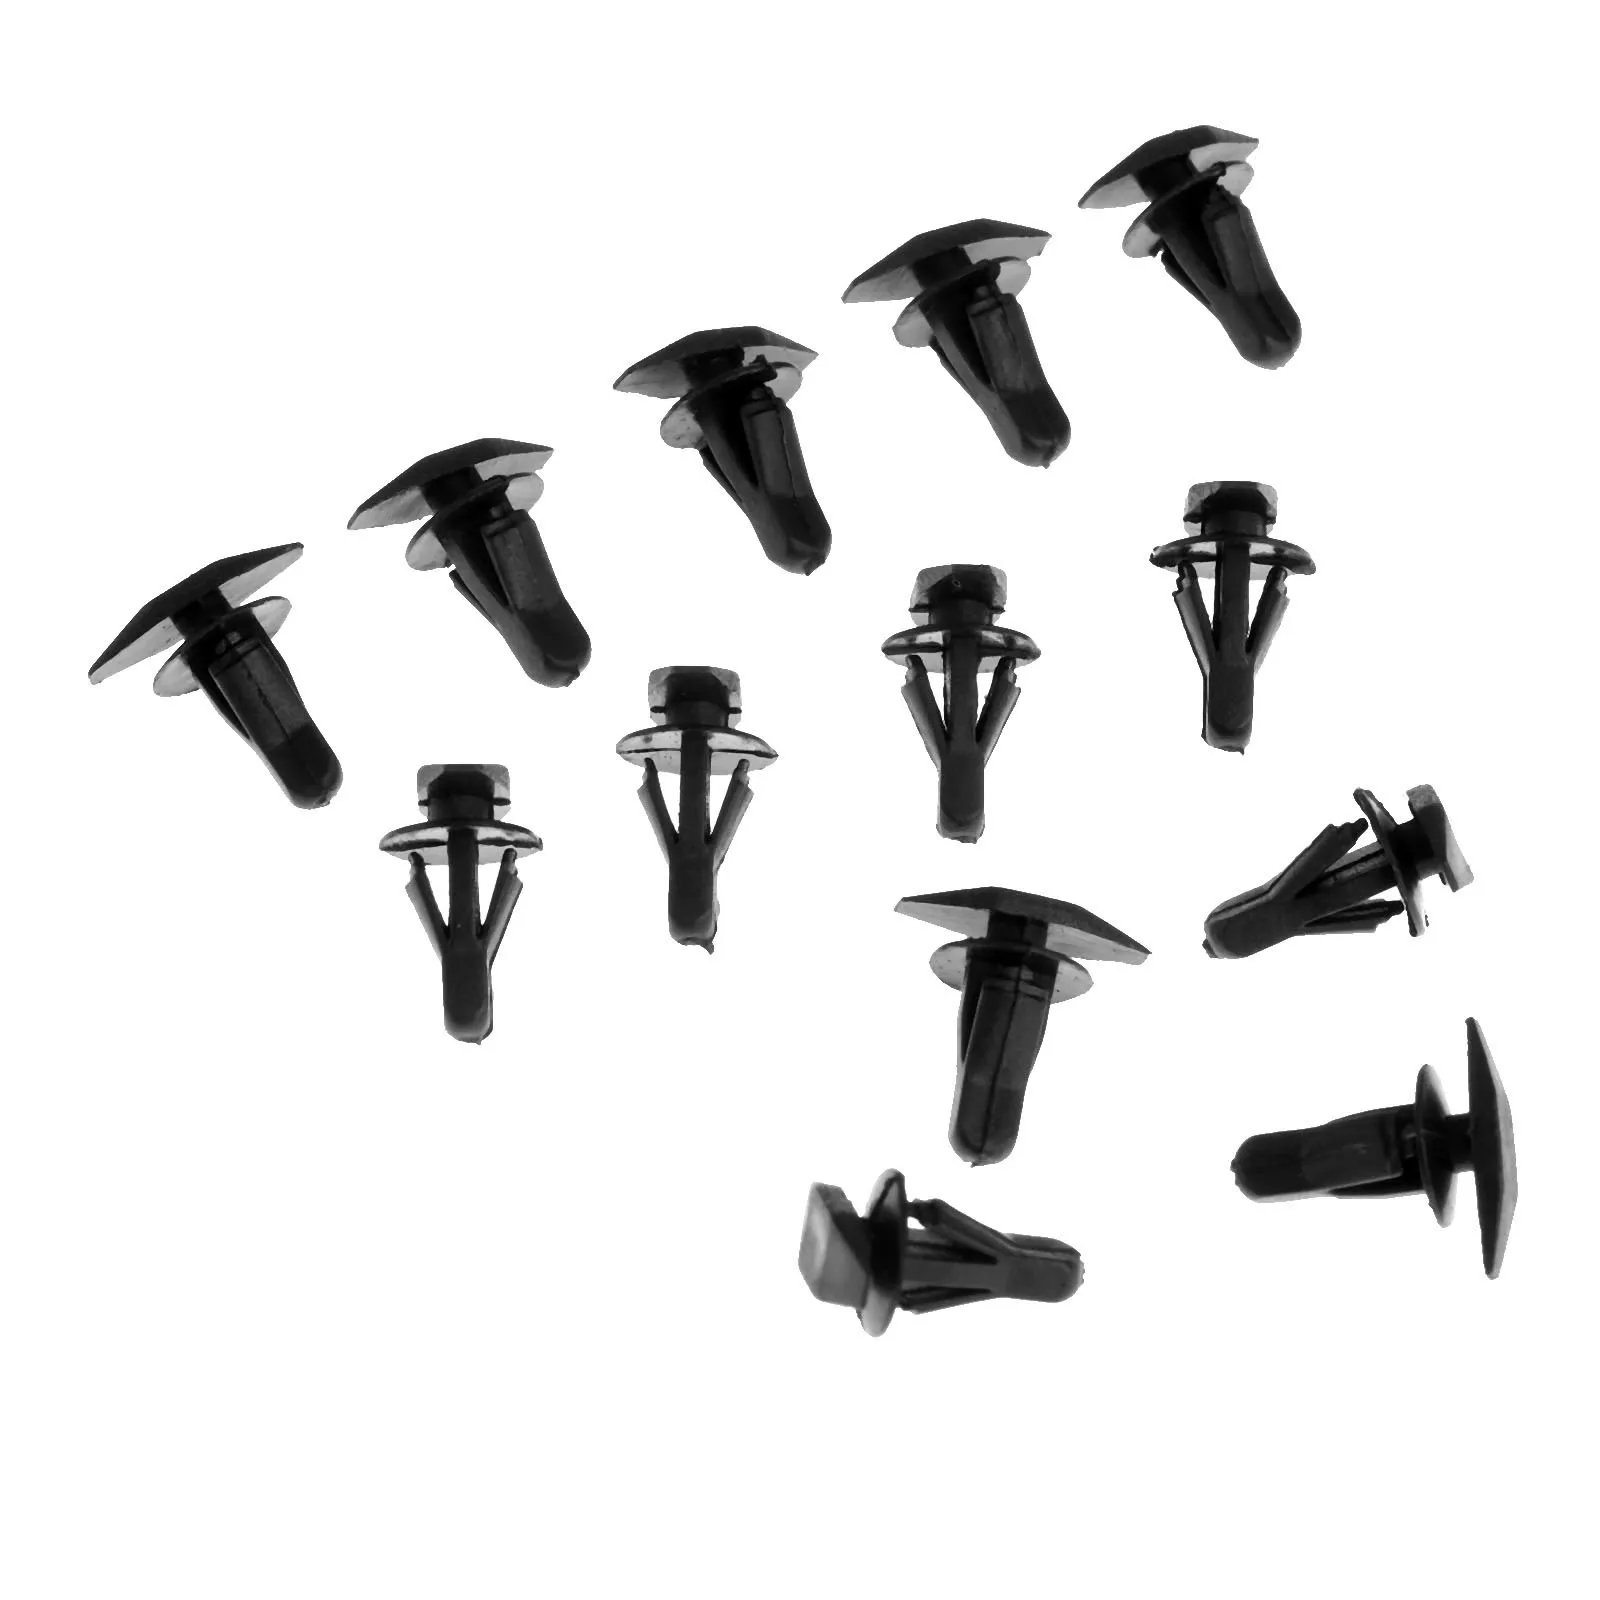 

50pcs Fasteners Car Door Window Sealing Interior Fixed Clamps Strip Auto Accessories Universal Type for Many Cars Plastic